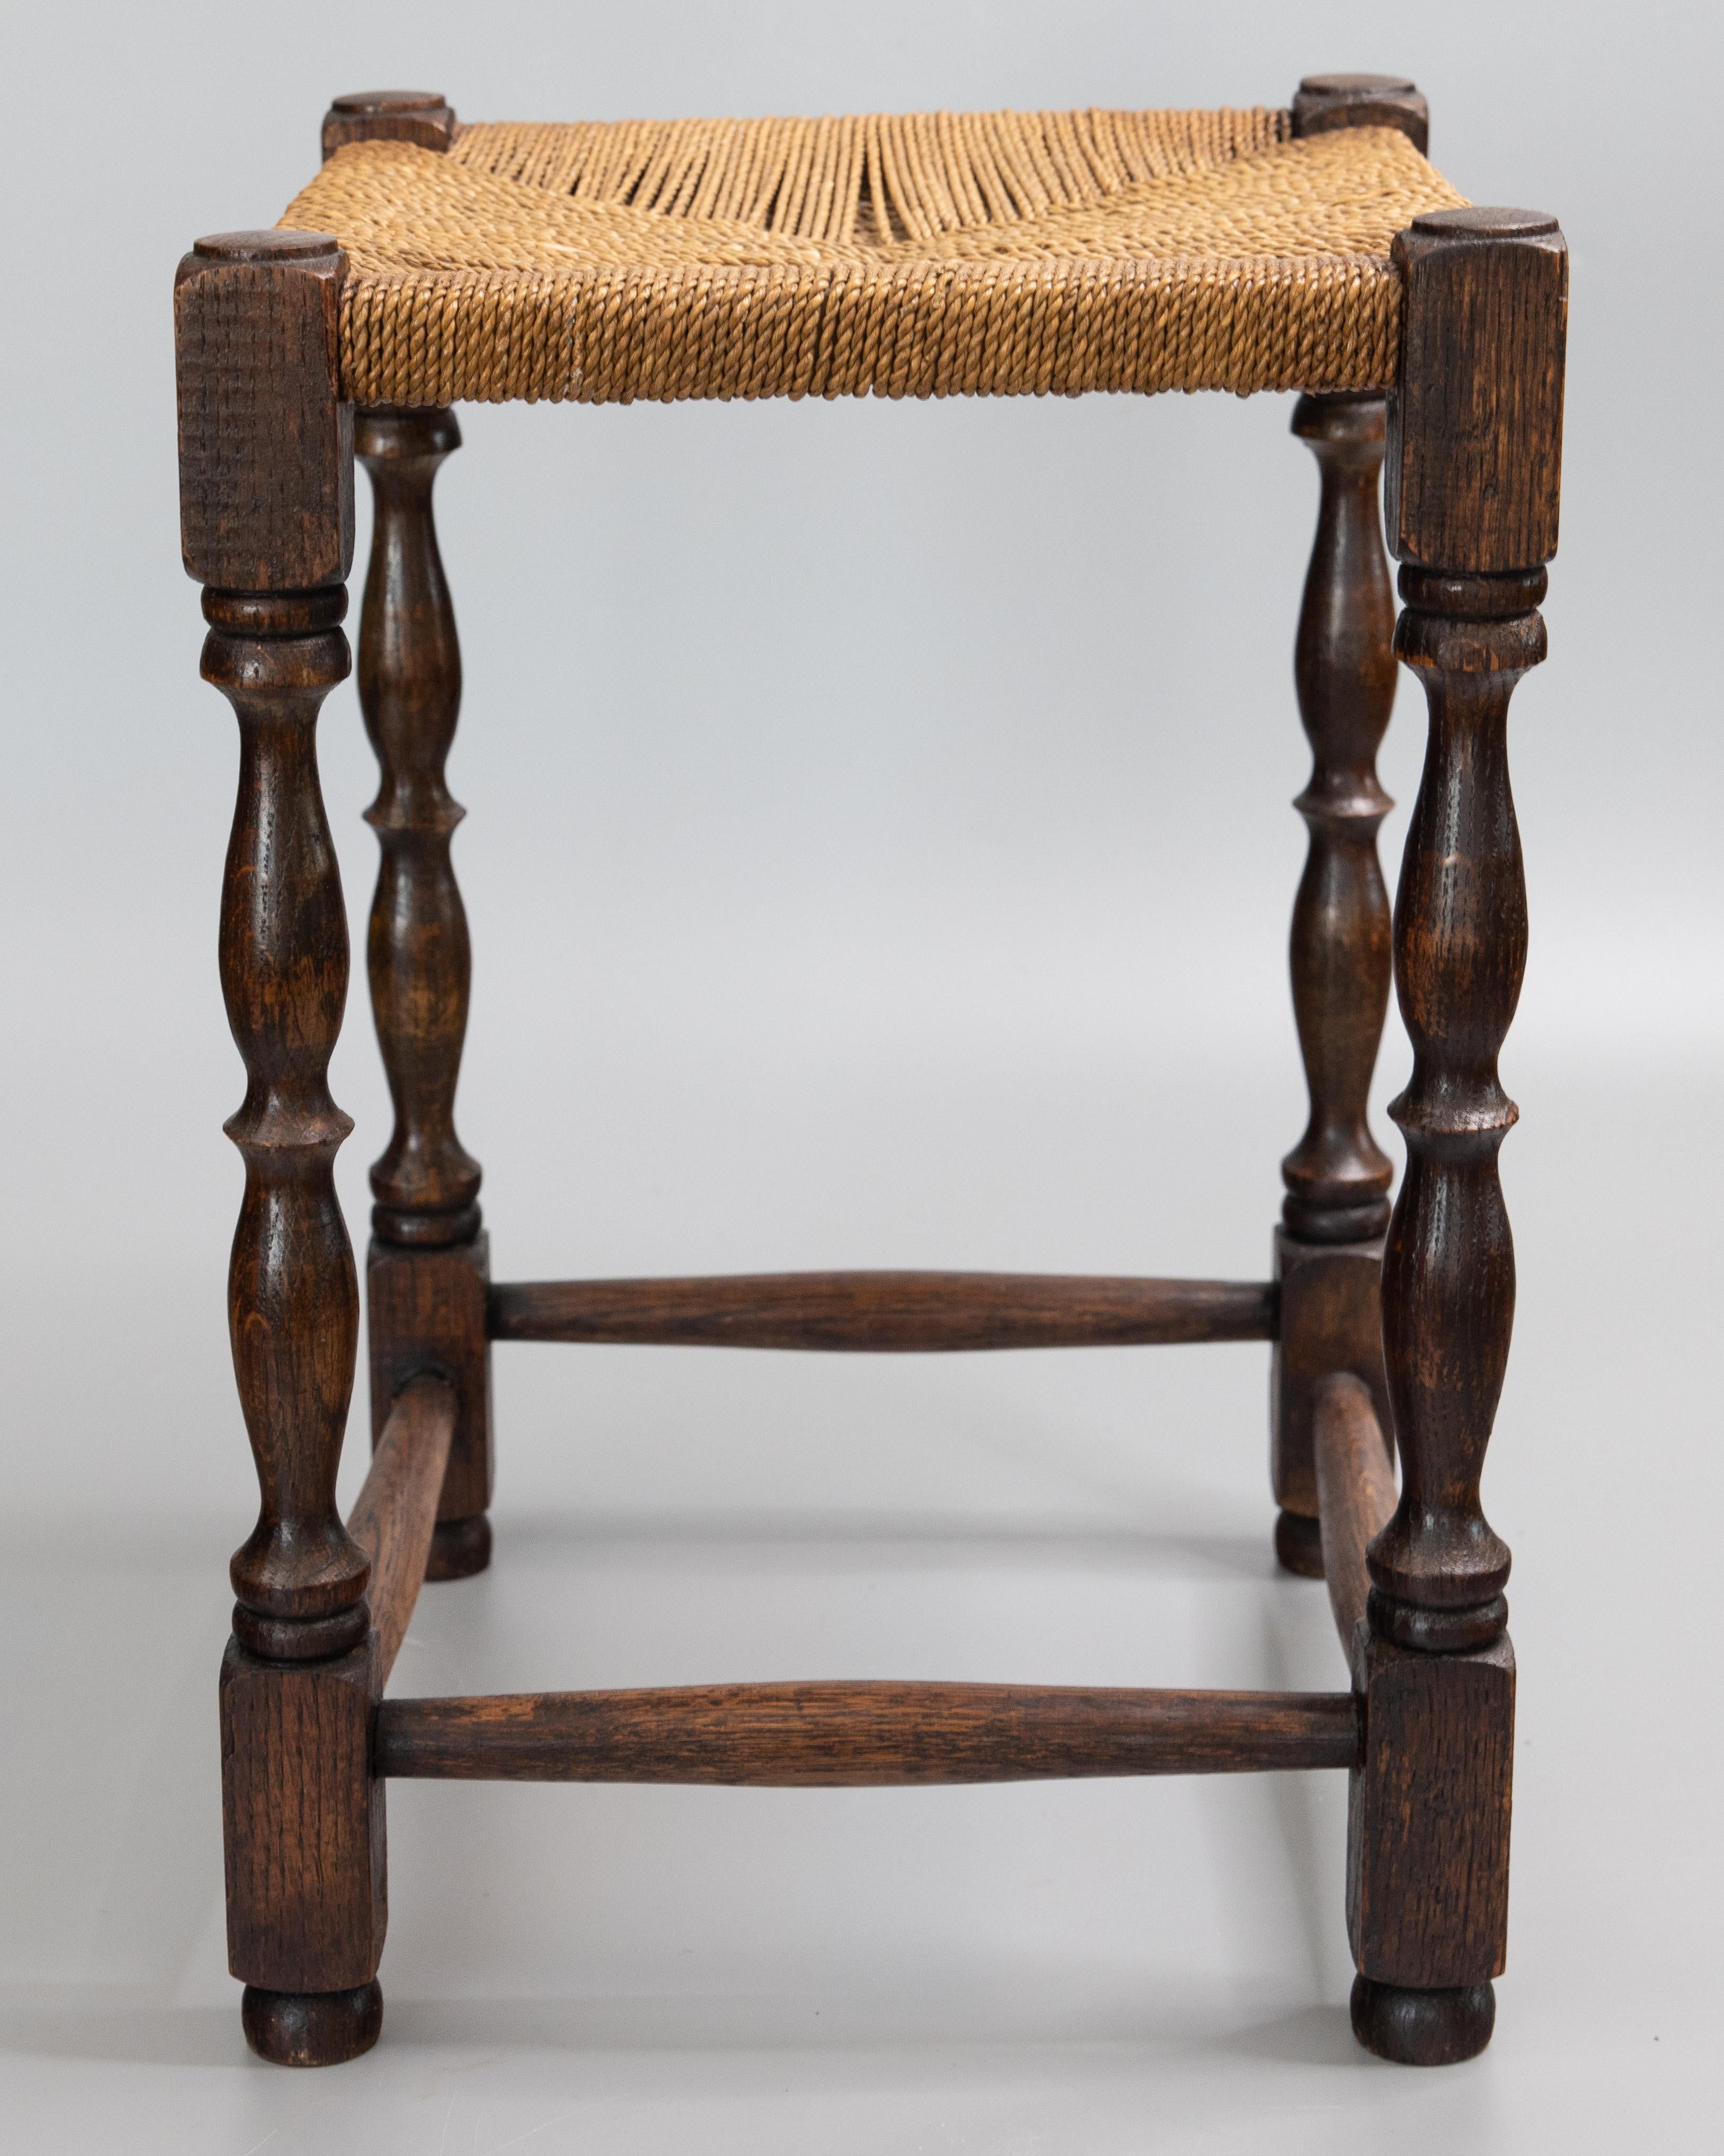 Edwardian Antique English Oak Woven Cord Rope Stool Footstool, circa 1900 For Sale